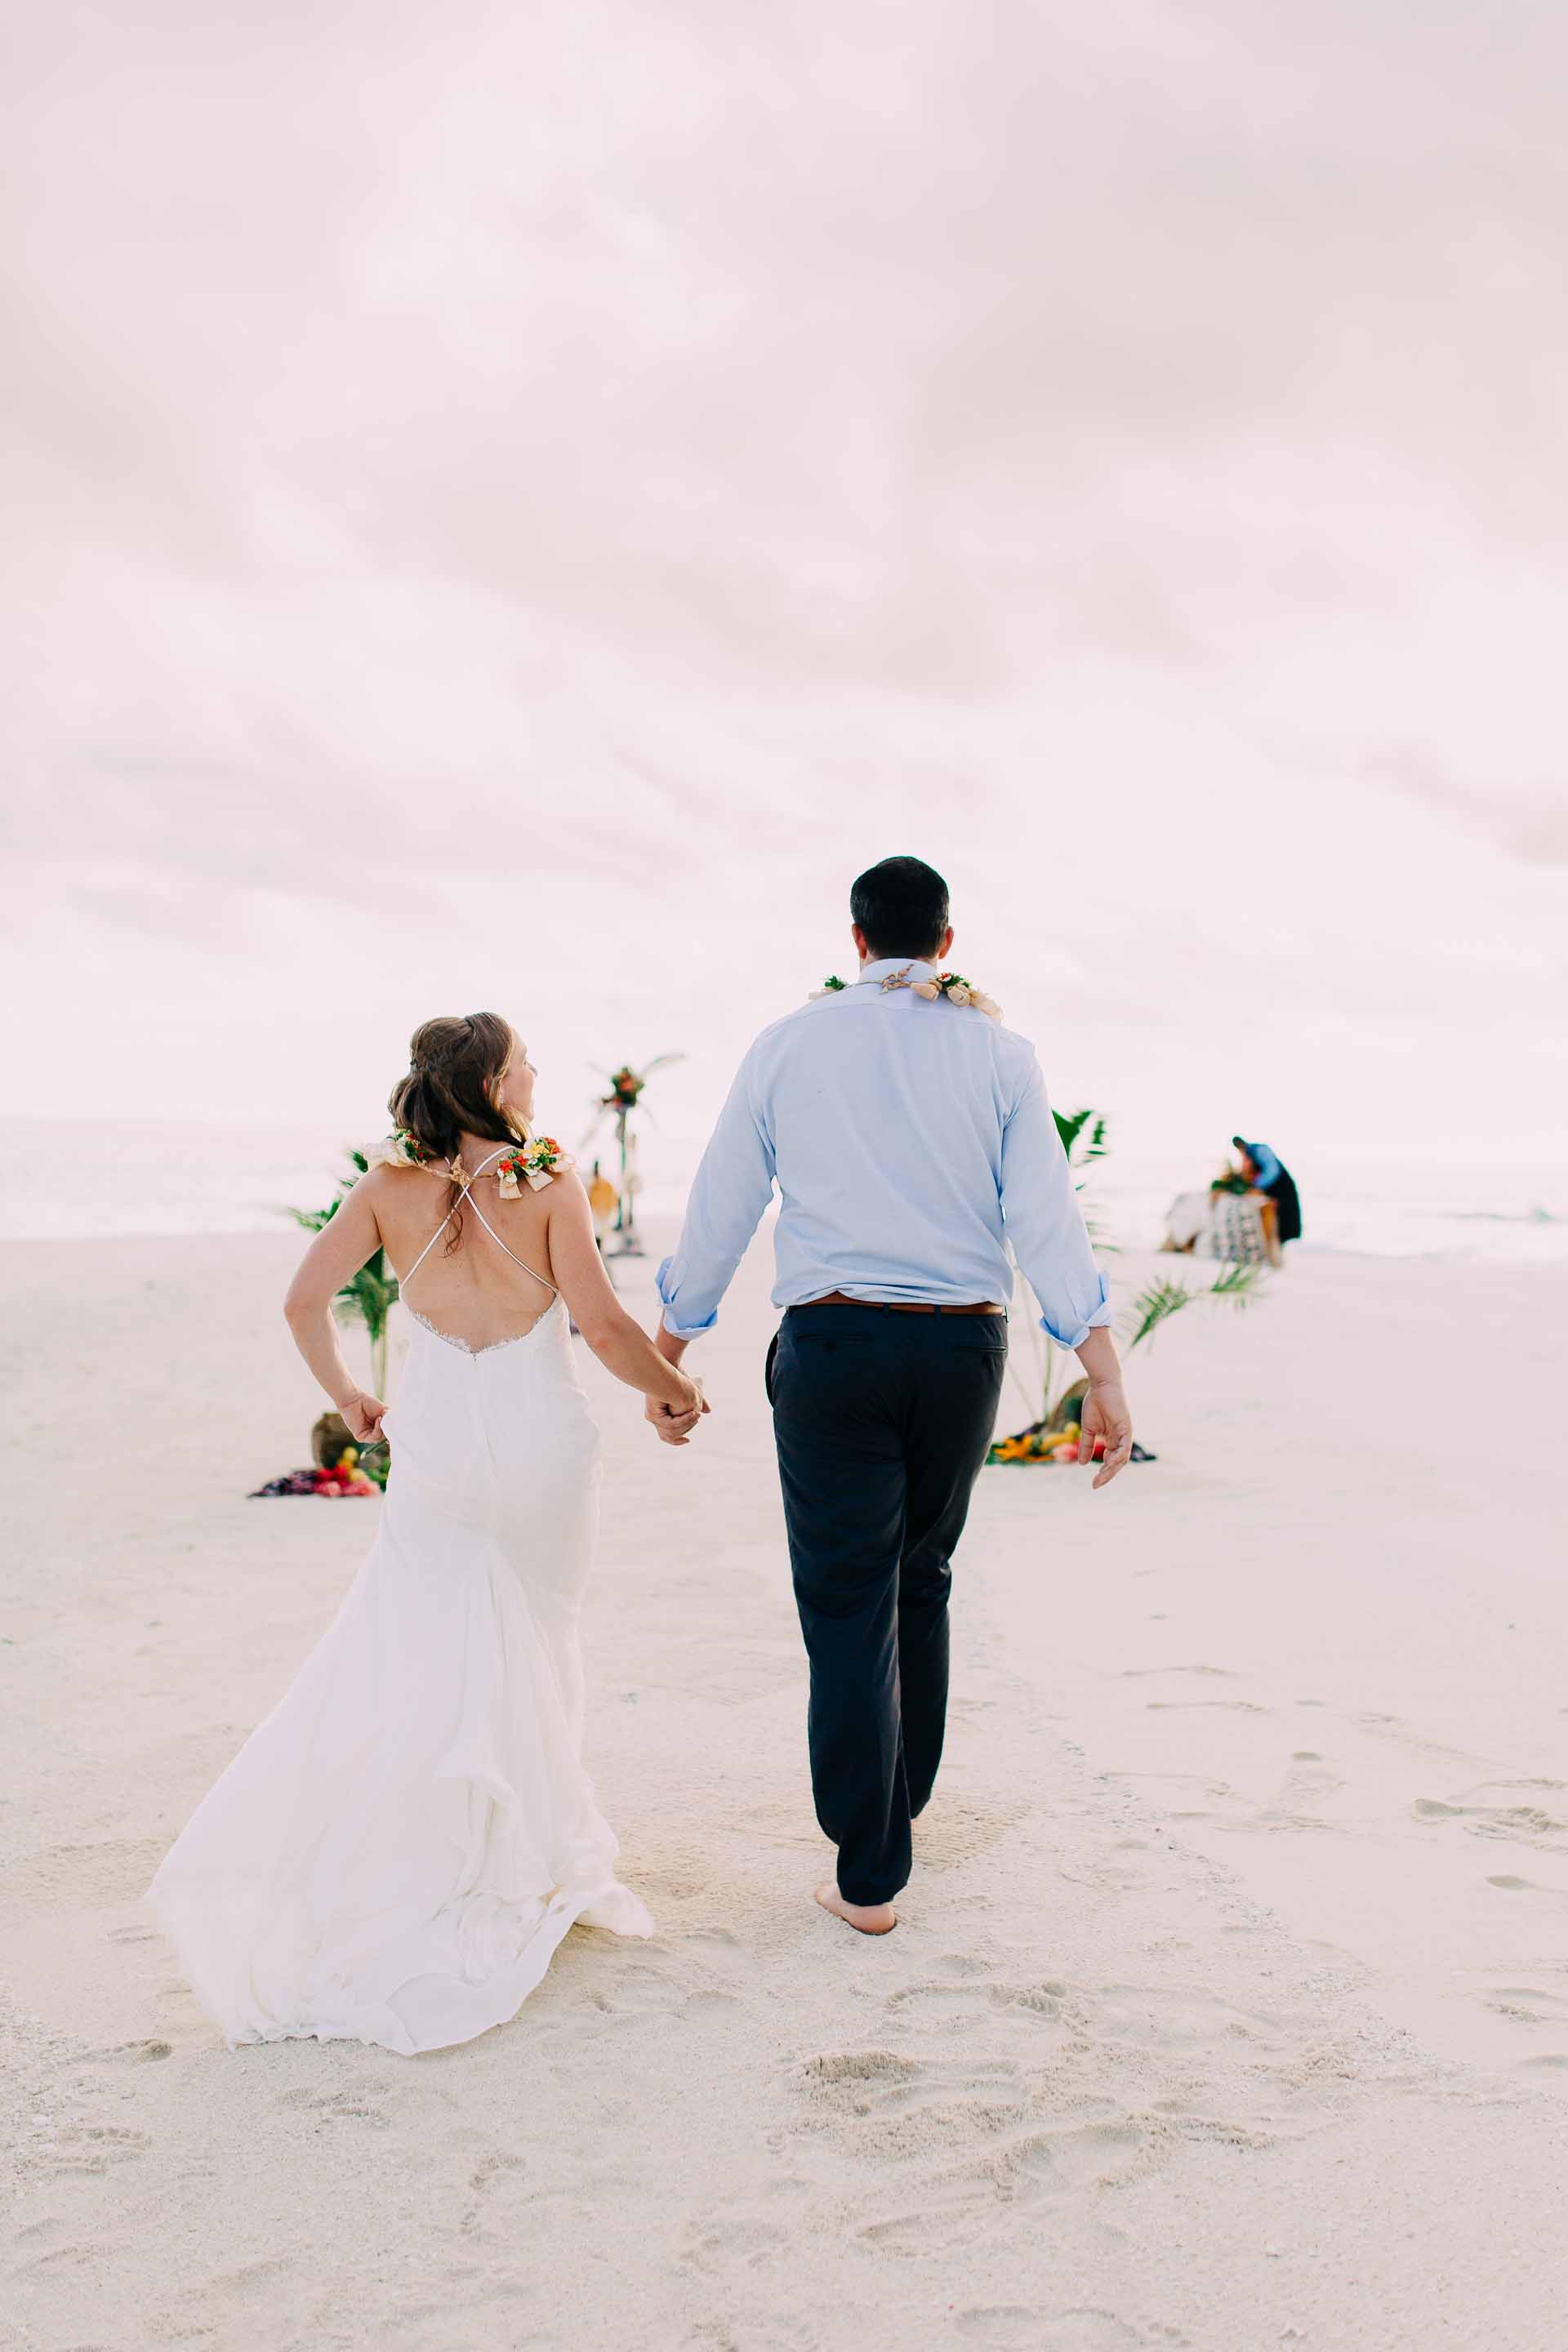 Bride and Groom walk up the aisle to exchange vows at their sand bar wedding.